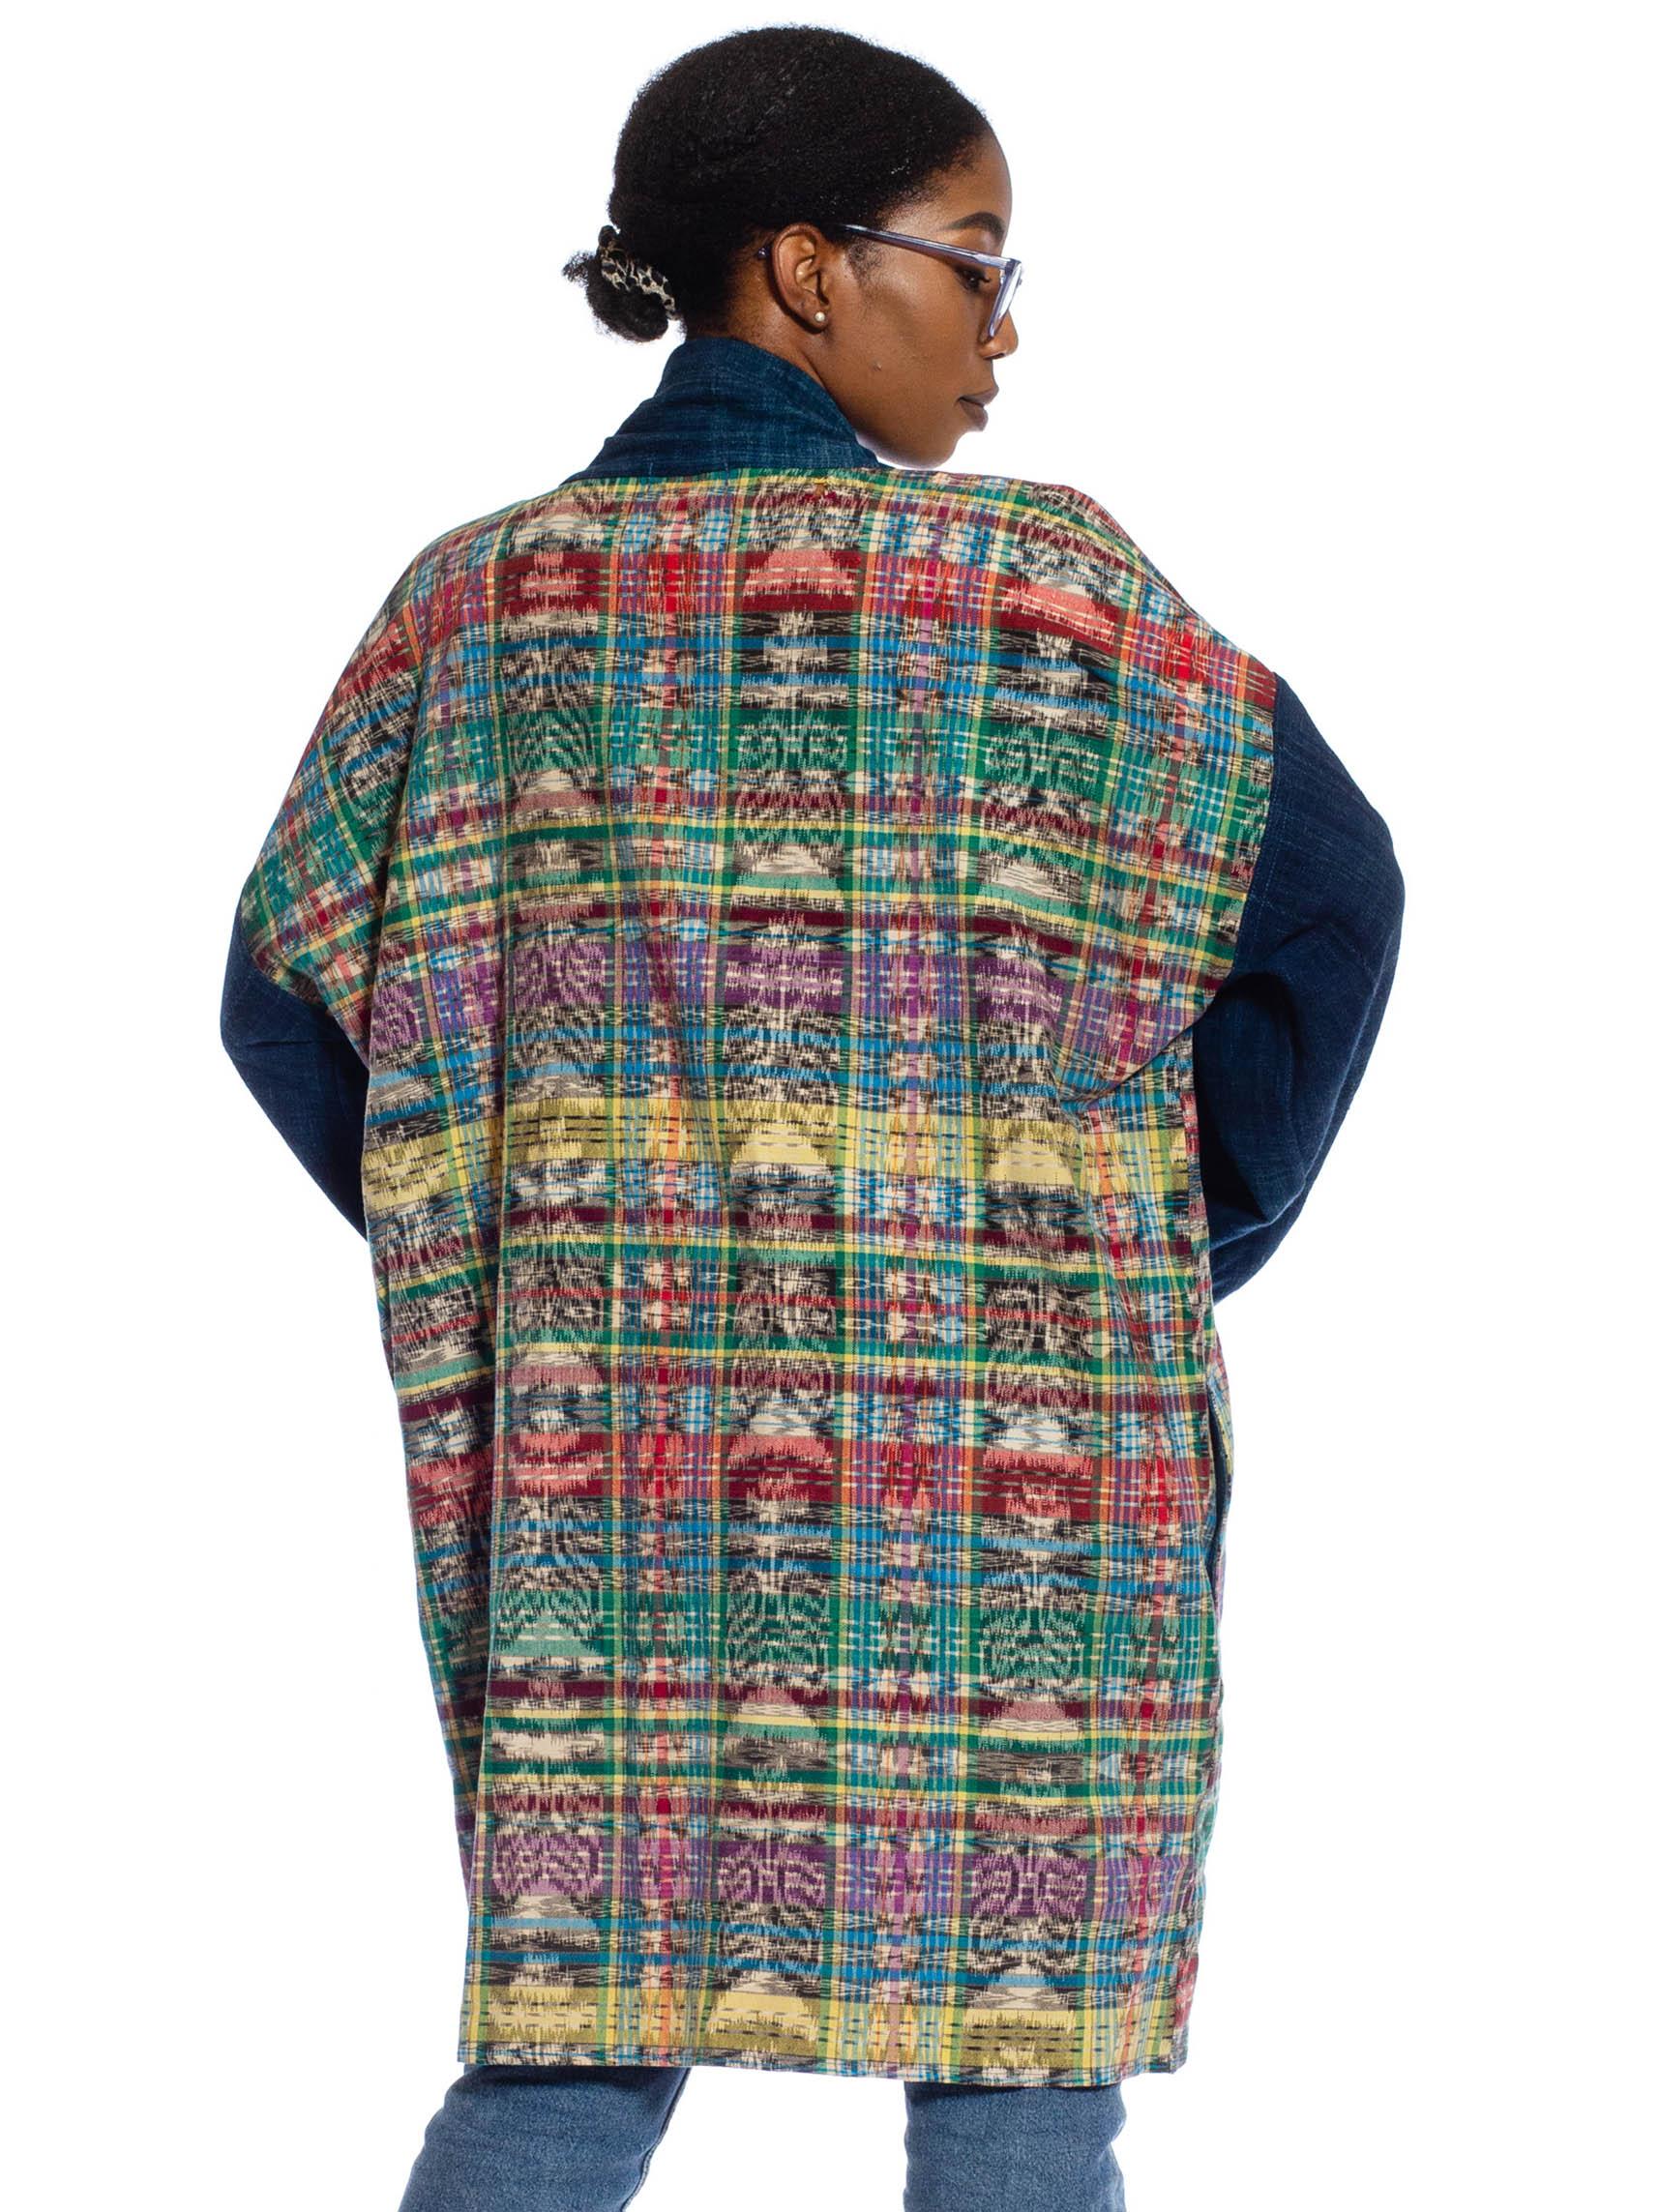 MORPHEW COLLECTION Navy Blue Multi African Cotton & Hand-Woven Guatemalan Ikat  For Sale 4